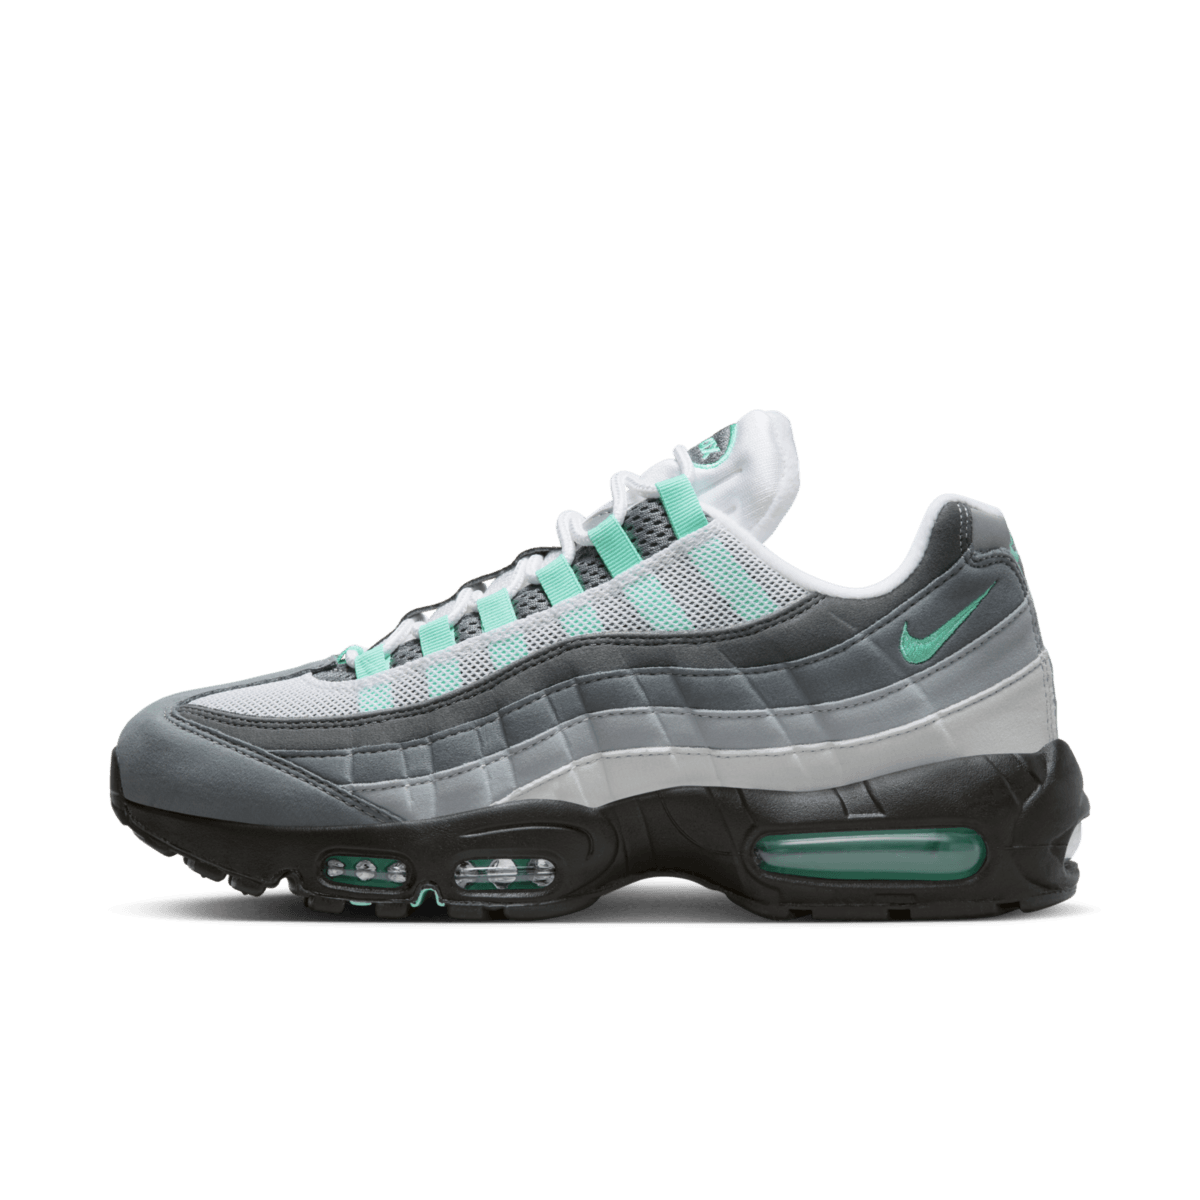 Nike Air Max 95 'Hyper Turquoise' FV4710-100